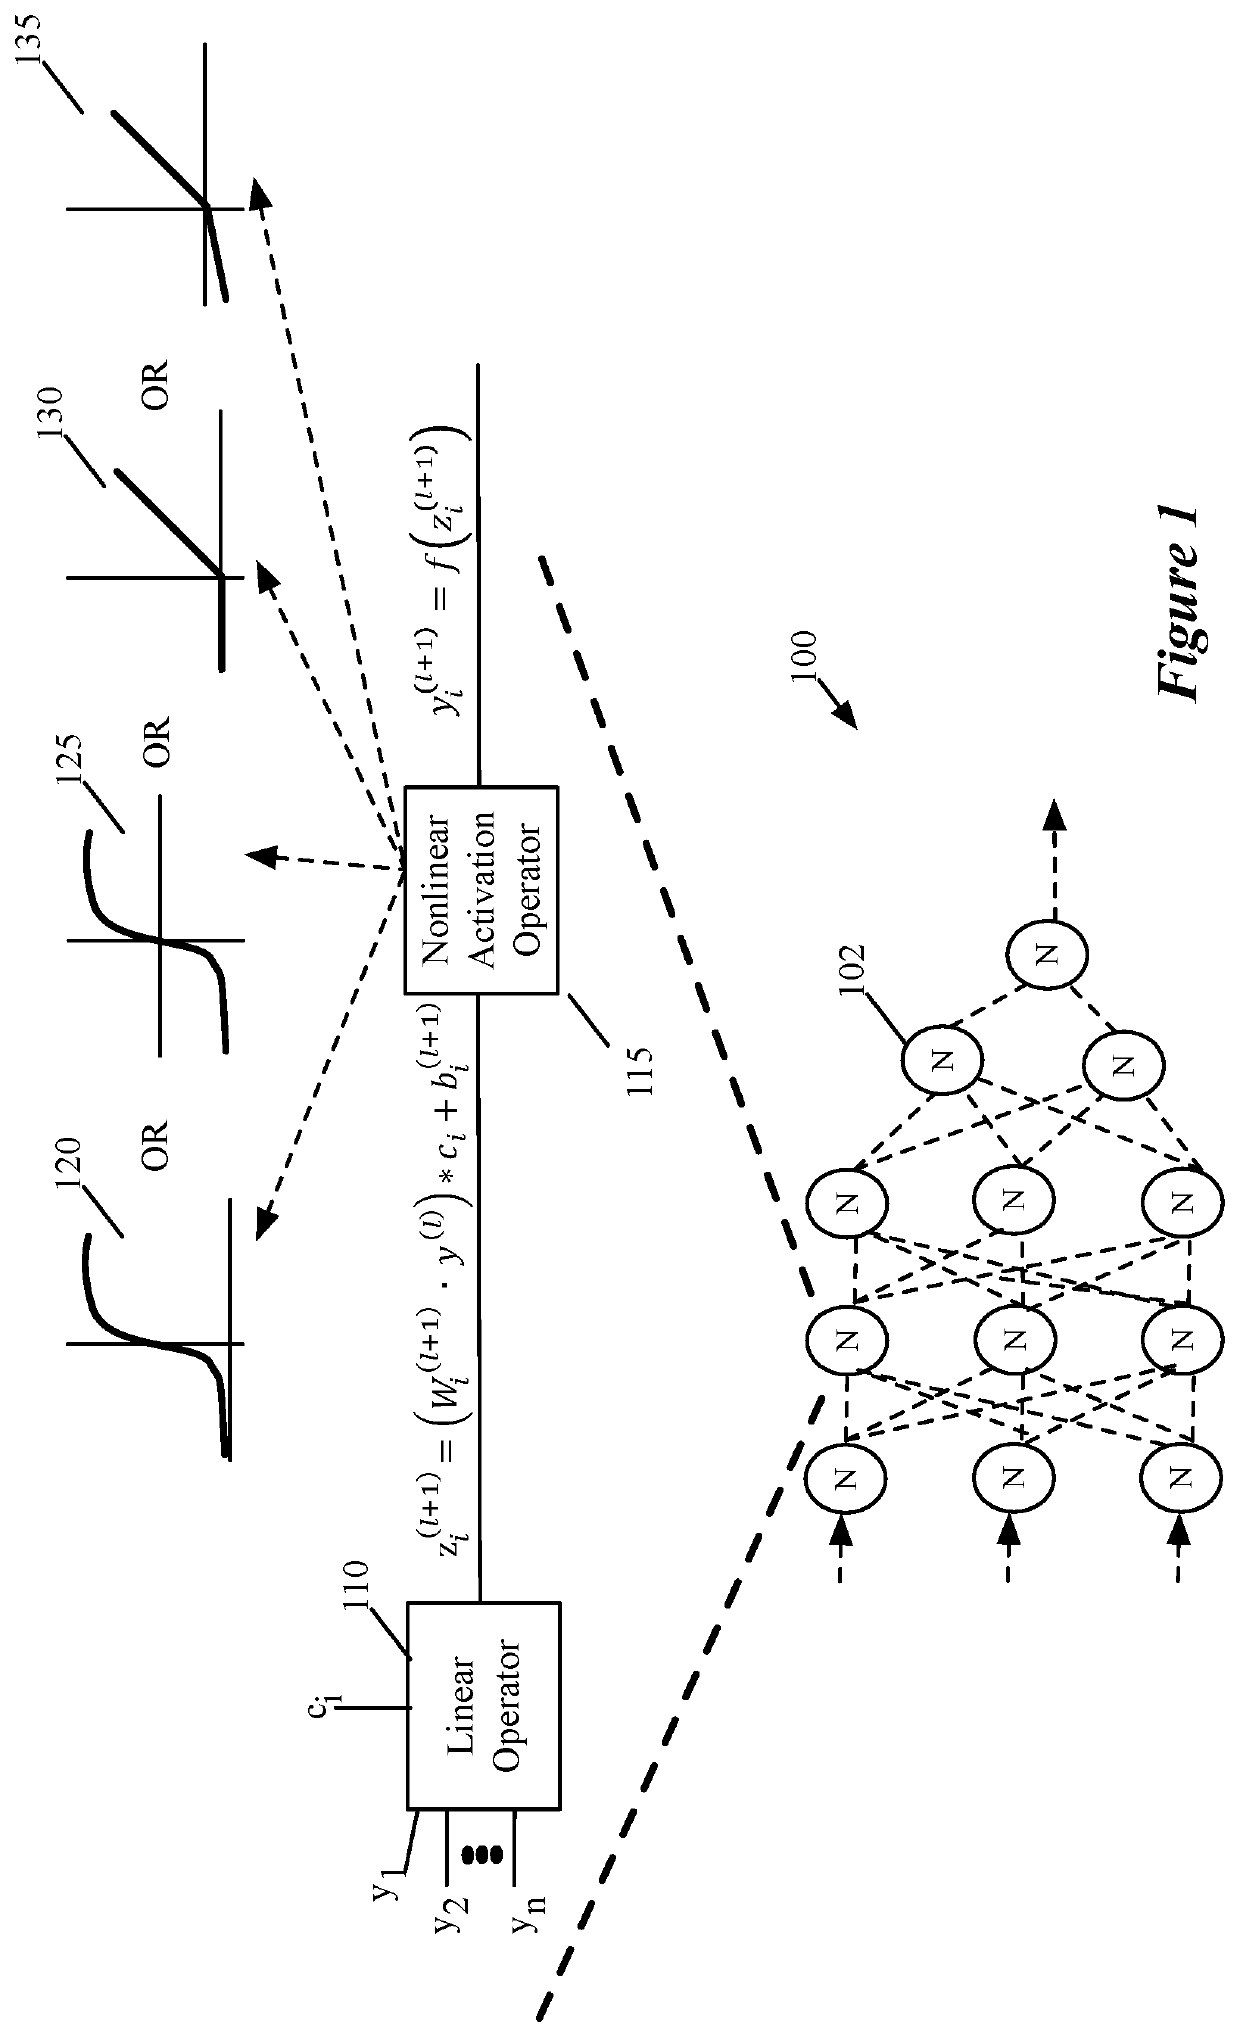 Encoding of weight values stored on neural network inference circuit